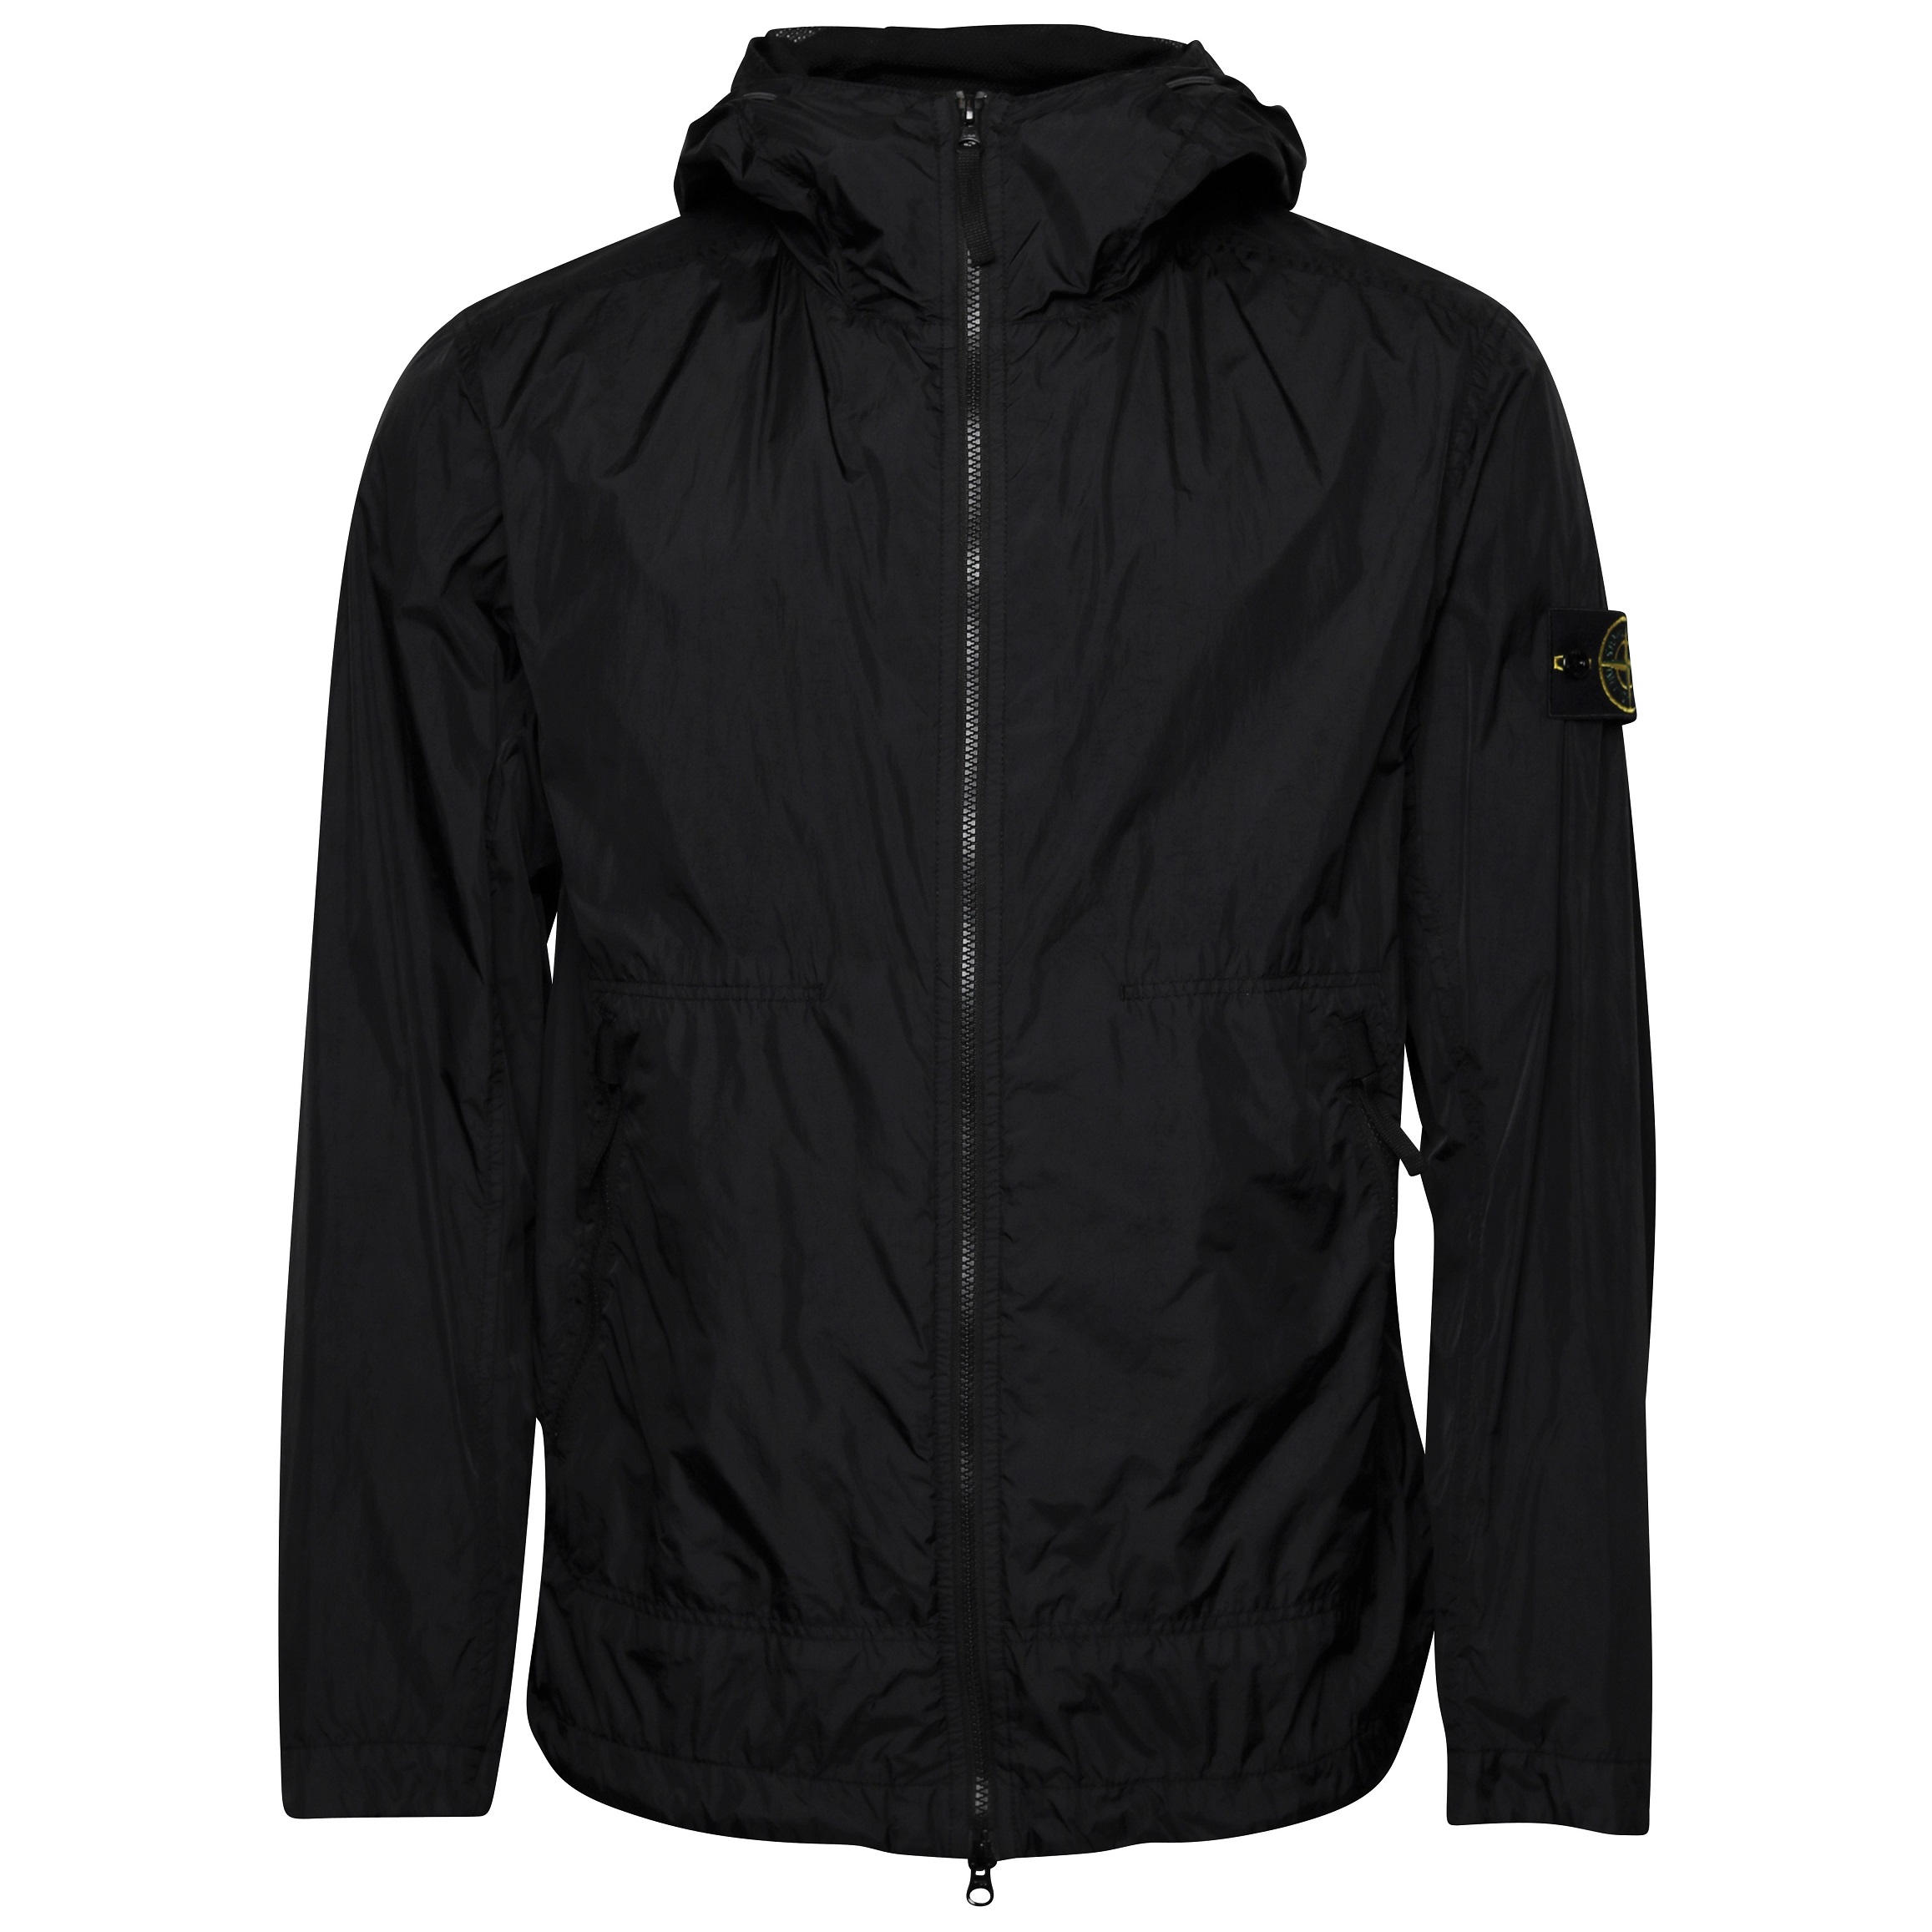 Stone Island Garment Dyed Crinkle Reps Hooded Light Jacket in Black 3XL